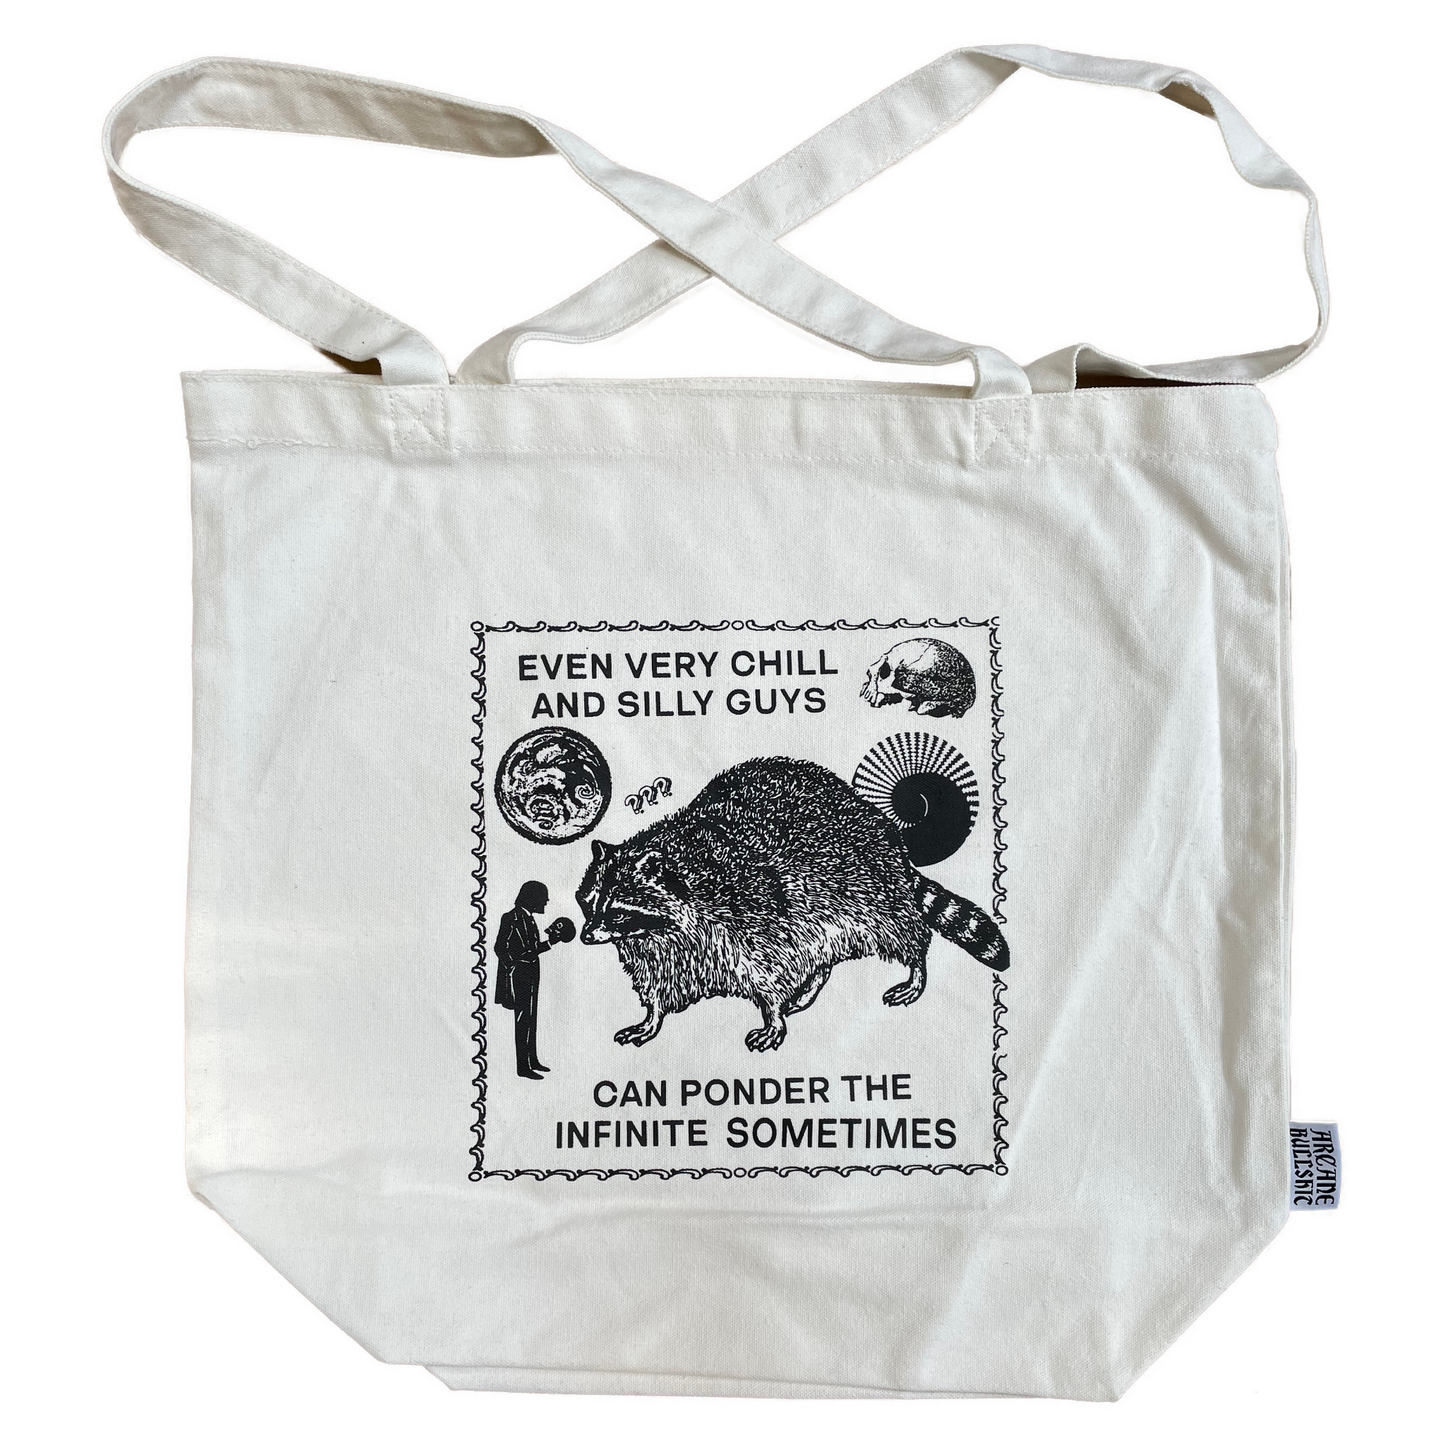 "Even Silly Guys" tote bag